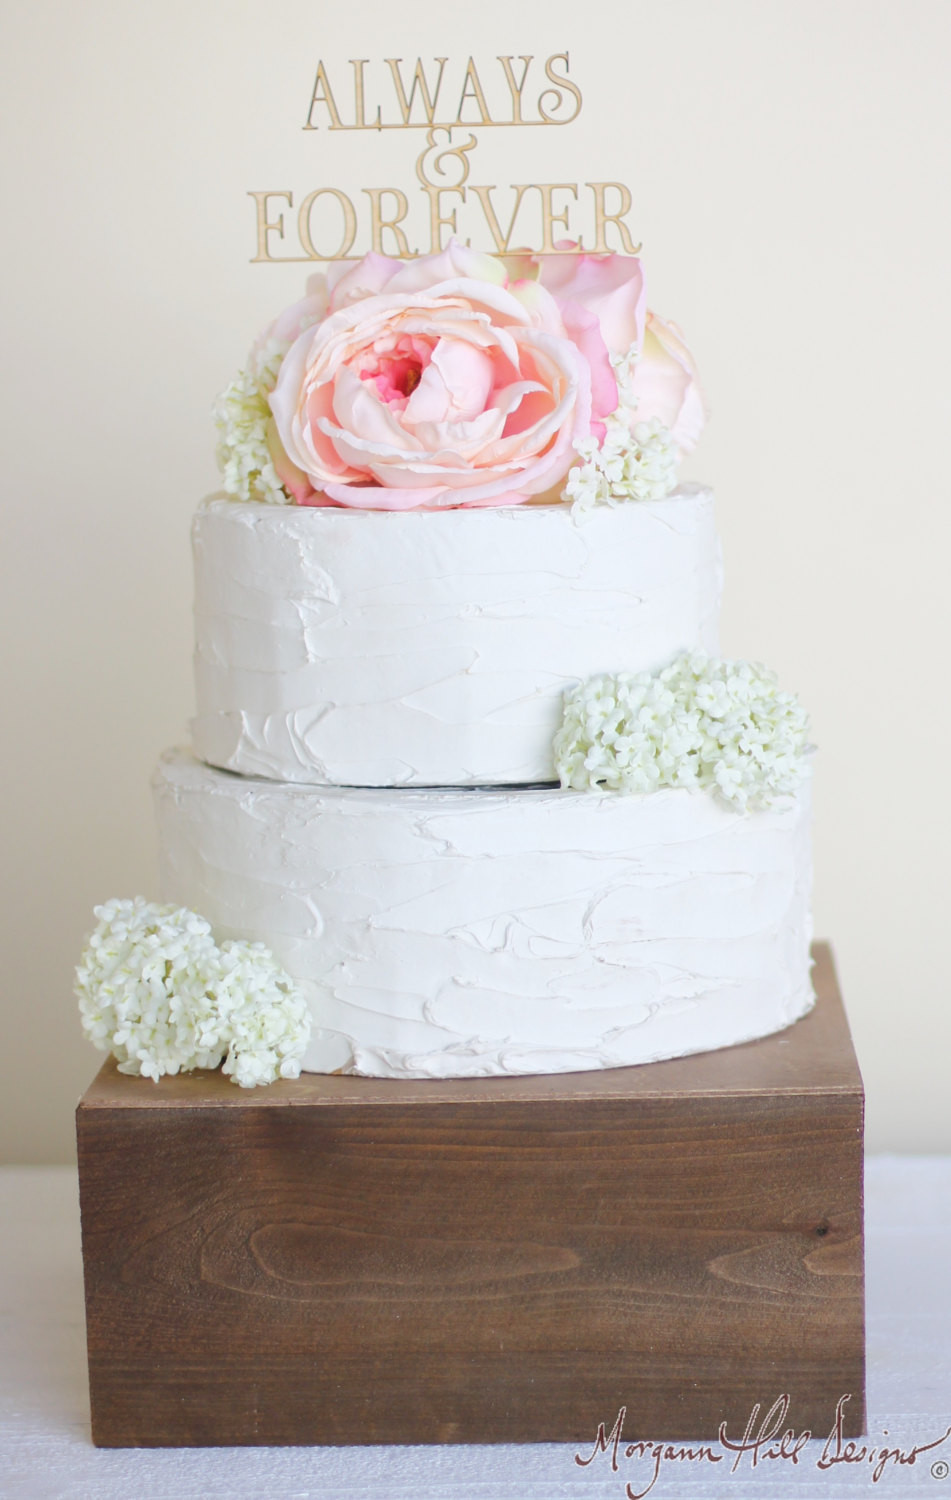 Wedding Cakes Tops
 27 of the Cutest Wedding Cake Toppers You ll Ever See